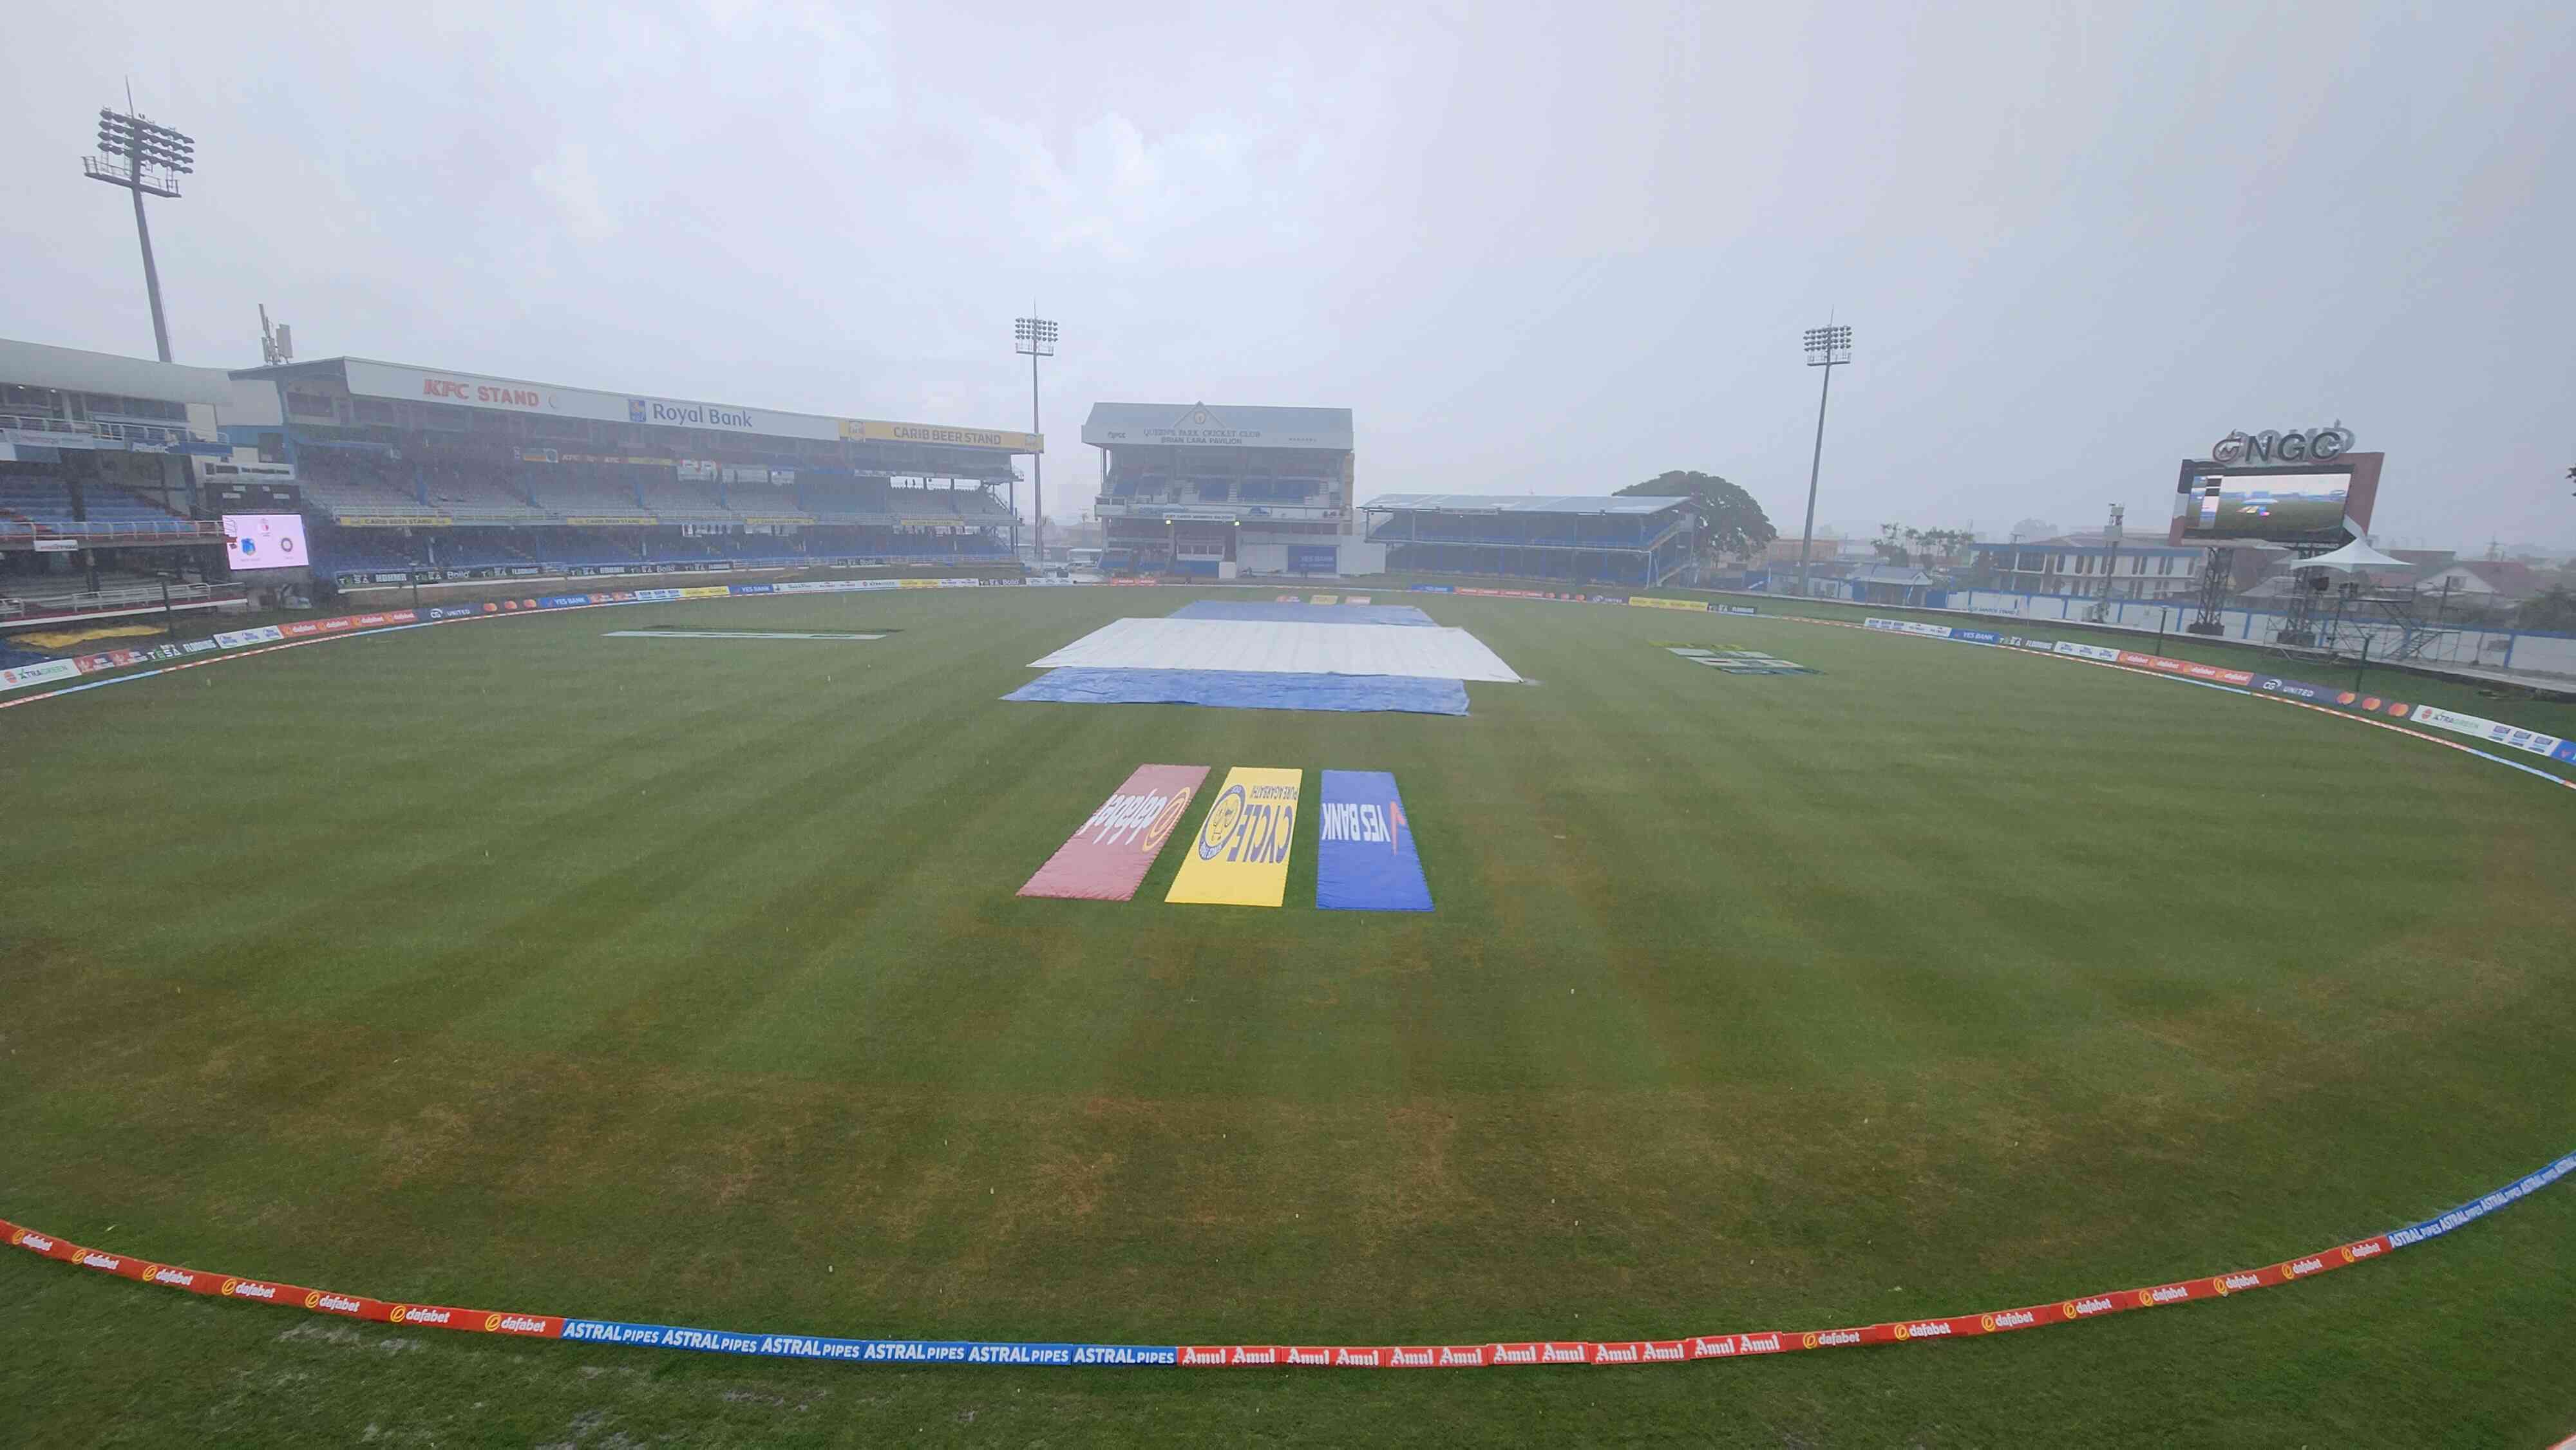 IND vs WI, Day 5 |  Rain Continues To Play Hide and Seek, Chances Of Play Very Slim